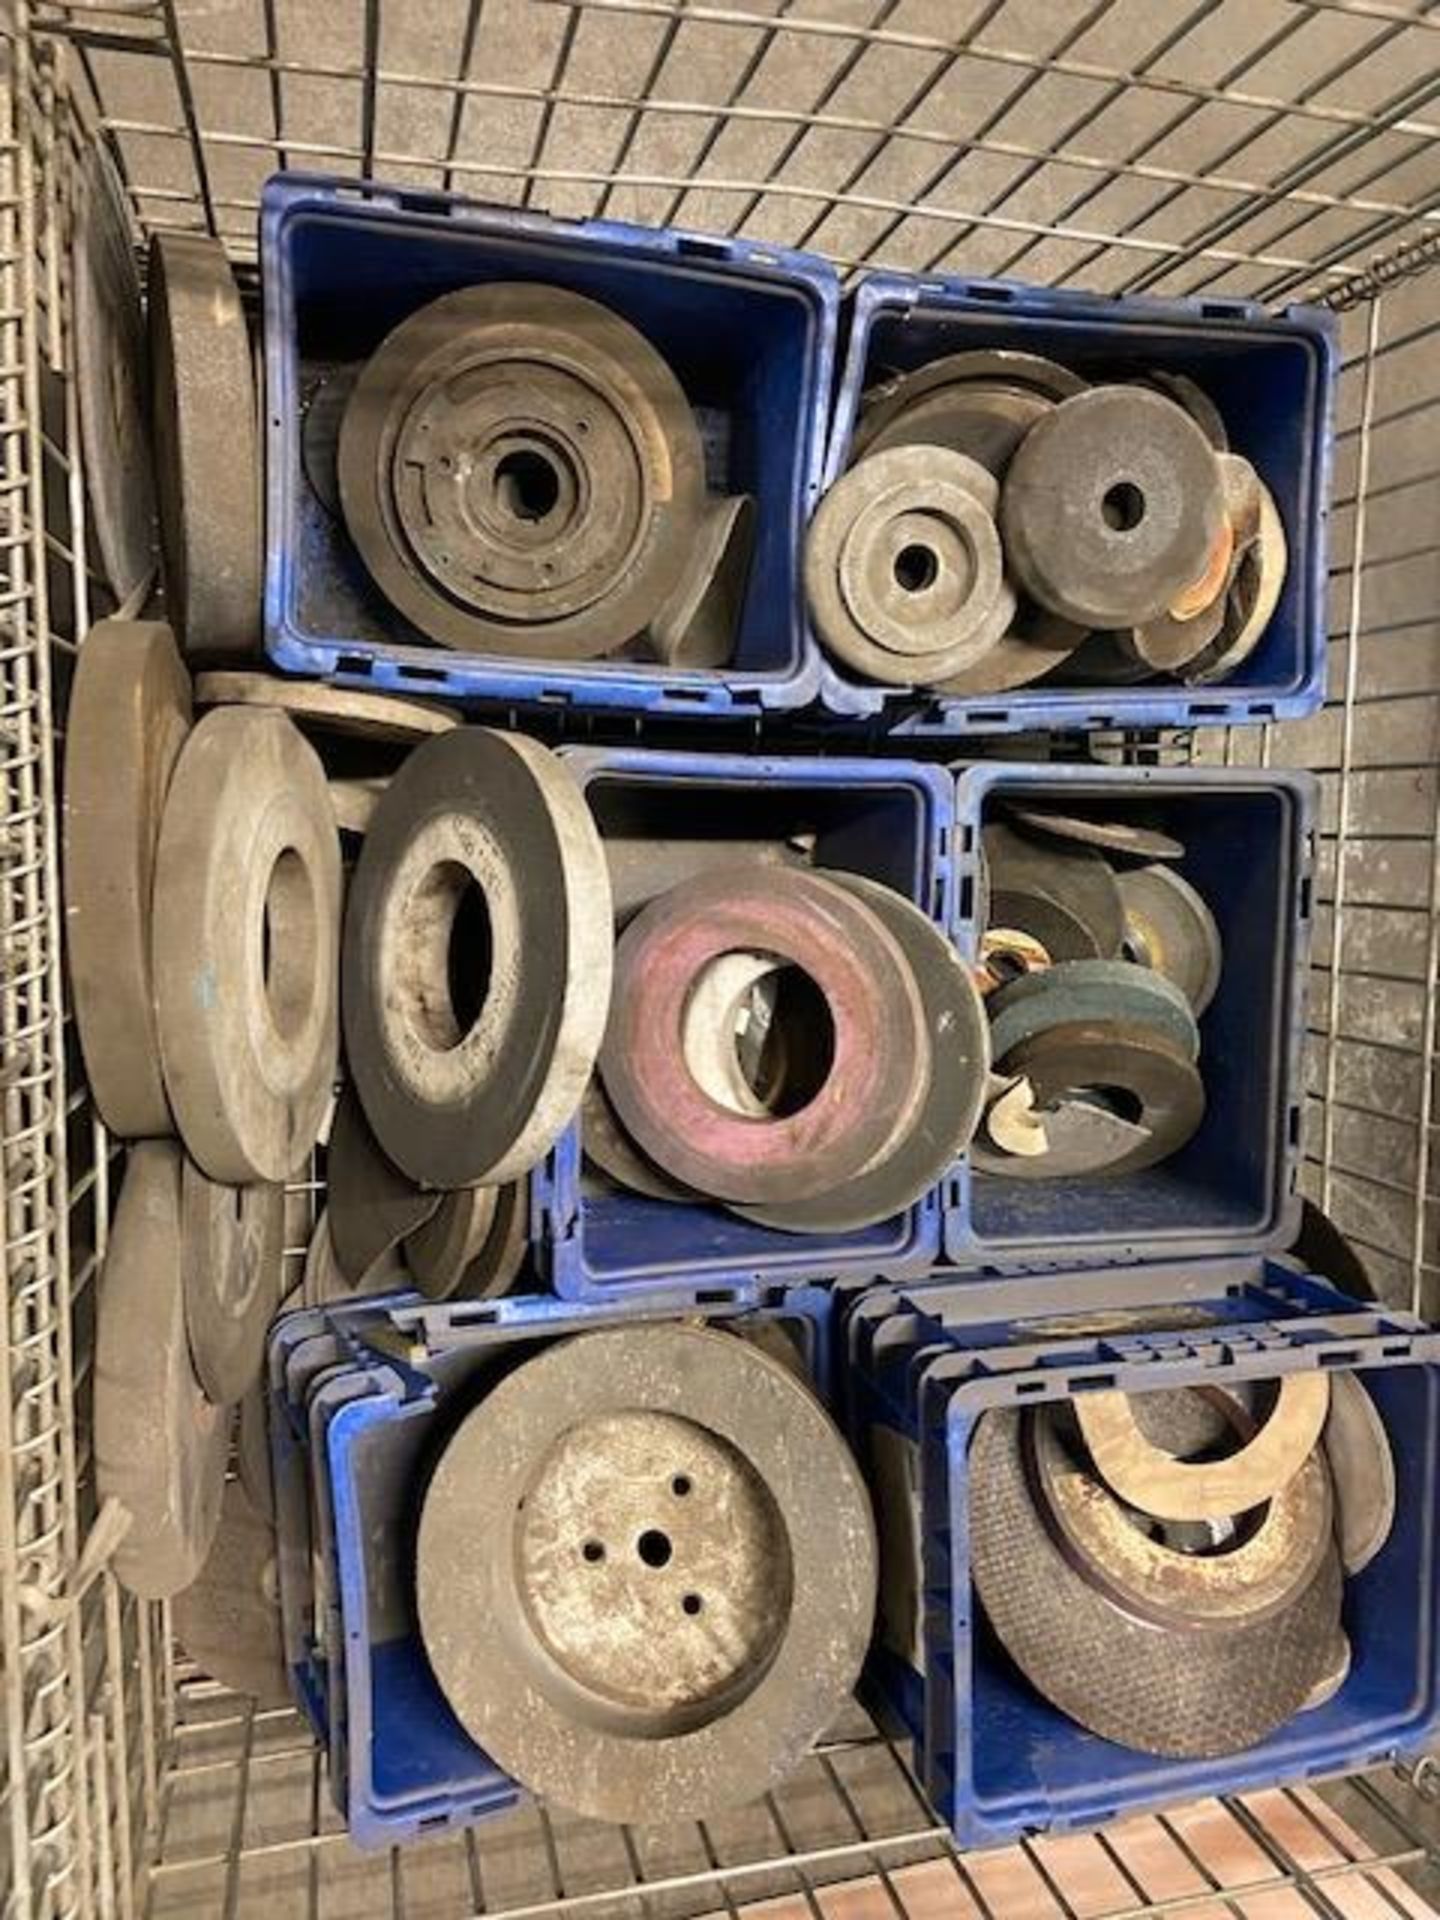 Lot of HUNDREDS of Grinding and Sanding Discs - Misc sizes (basket not included)